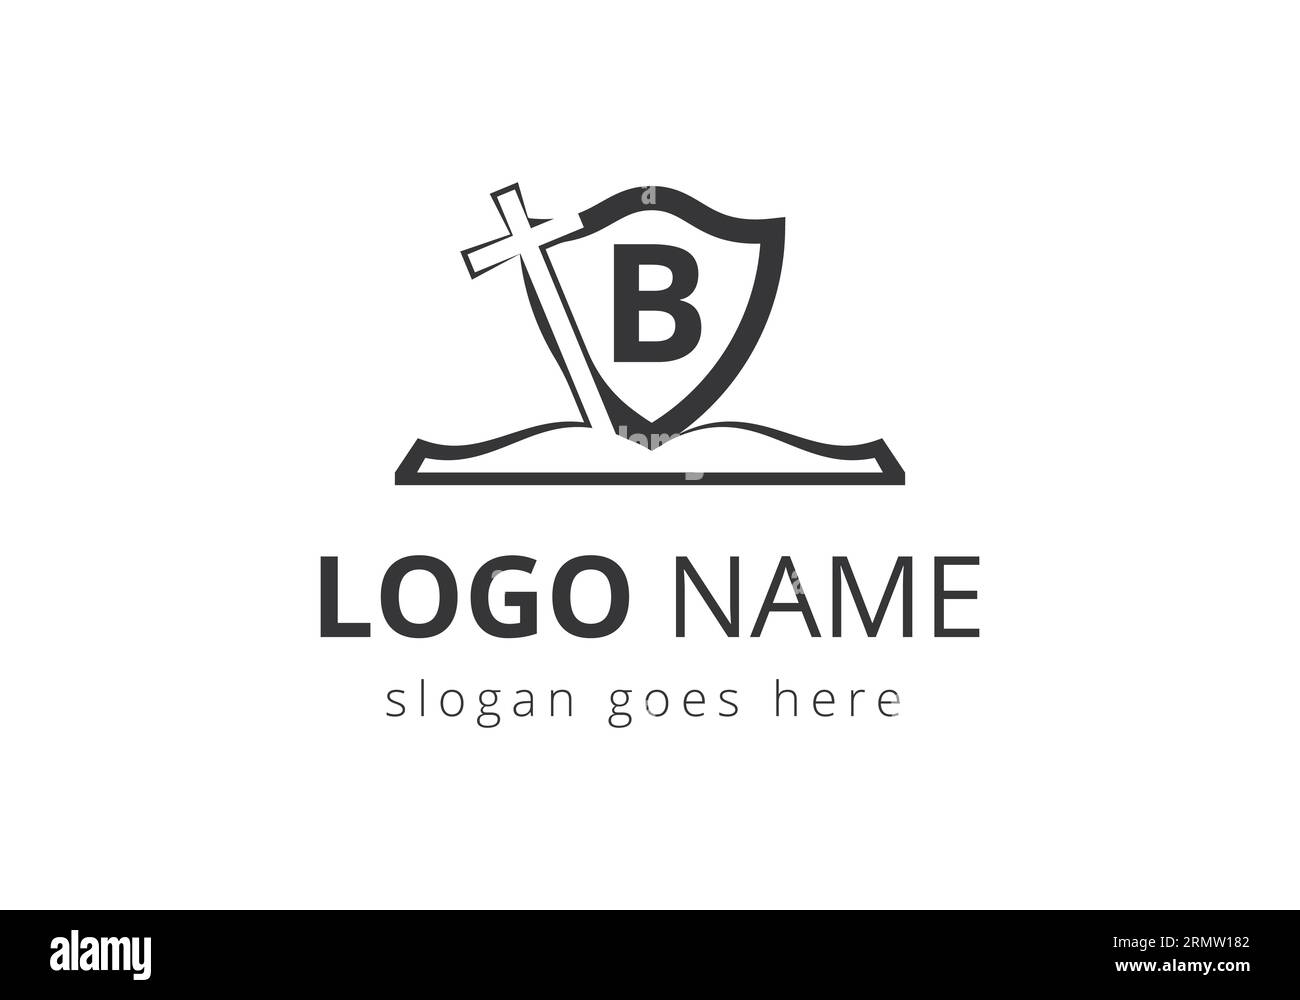 Church logo With B Letter Concept. Christian sign symbols. The cross of Jesus logo for christian church Stock Vector